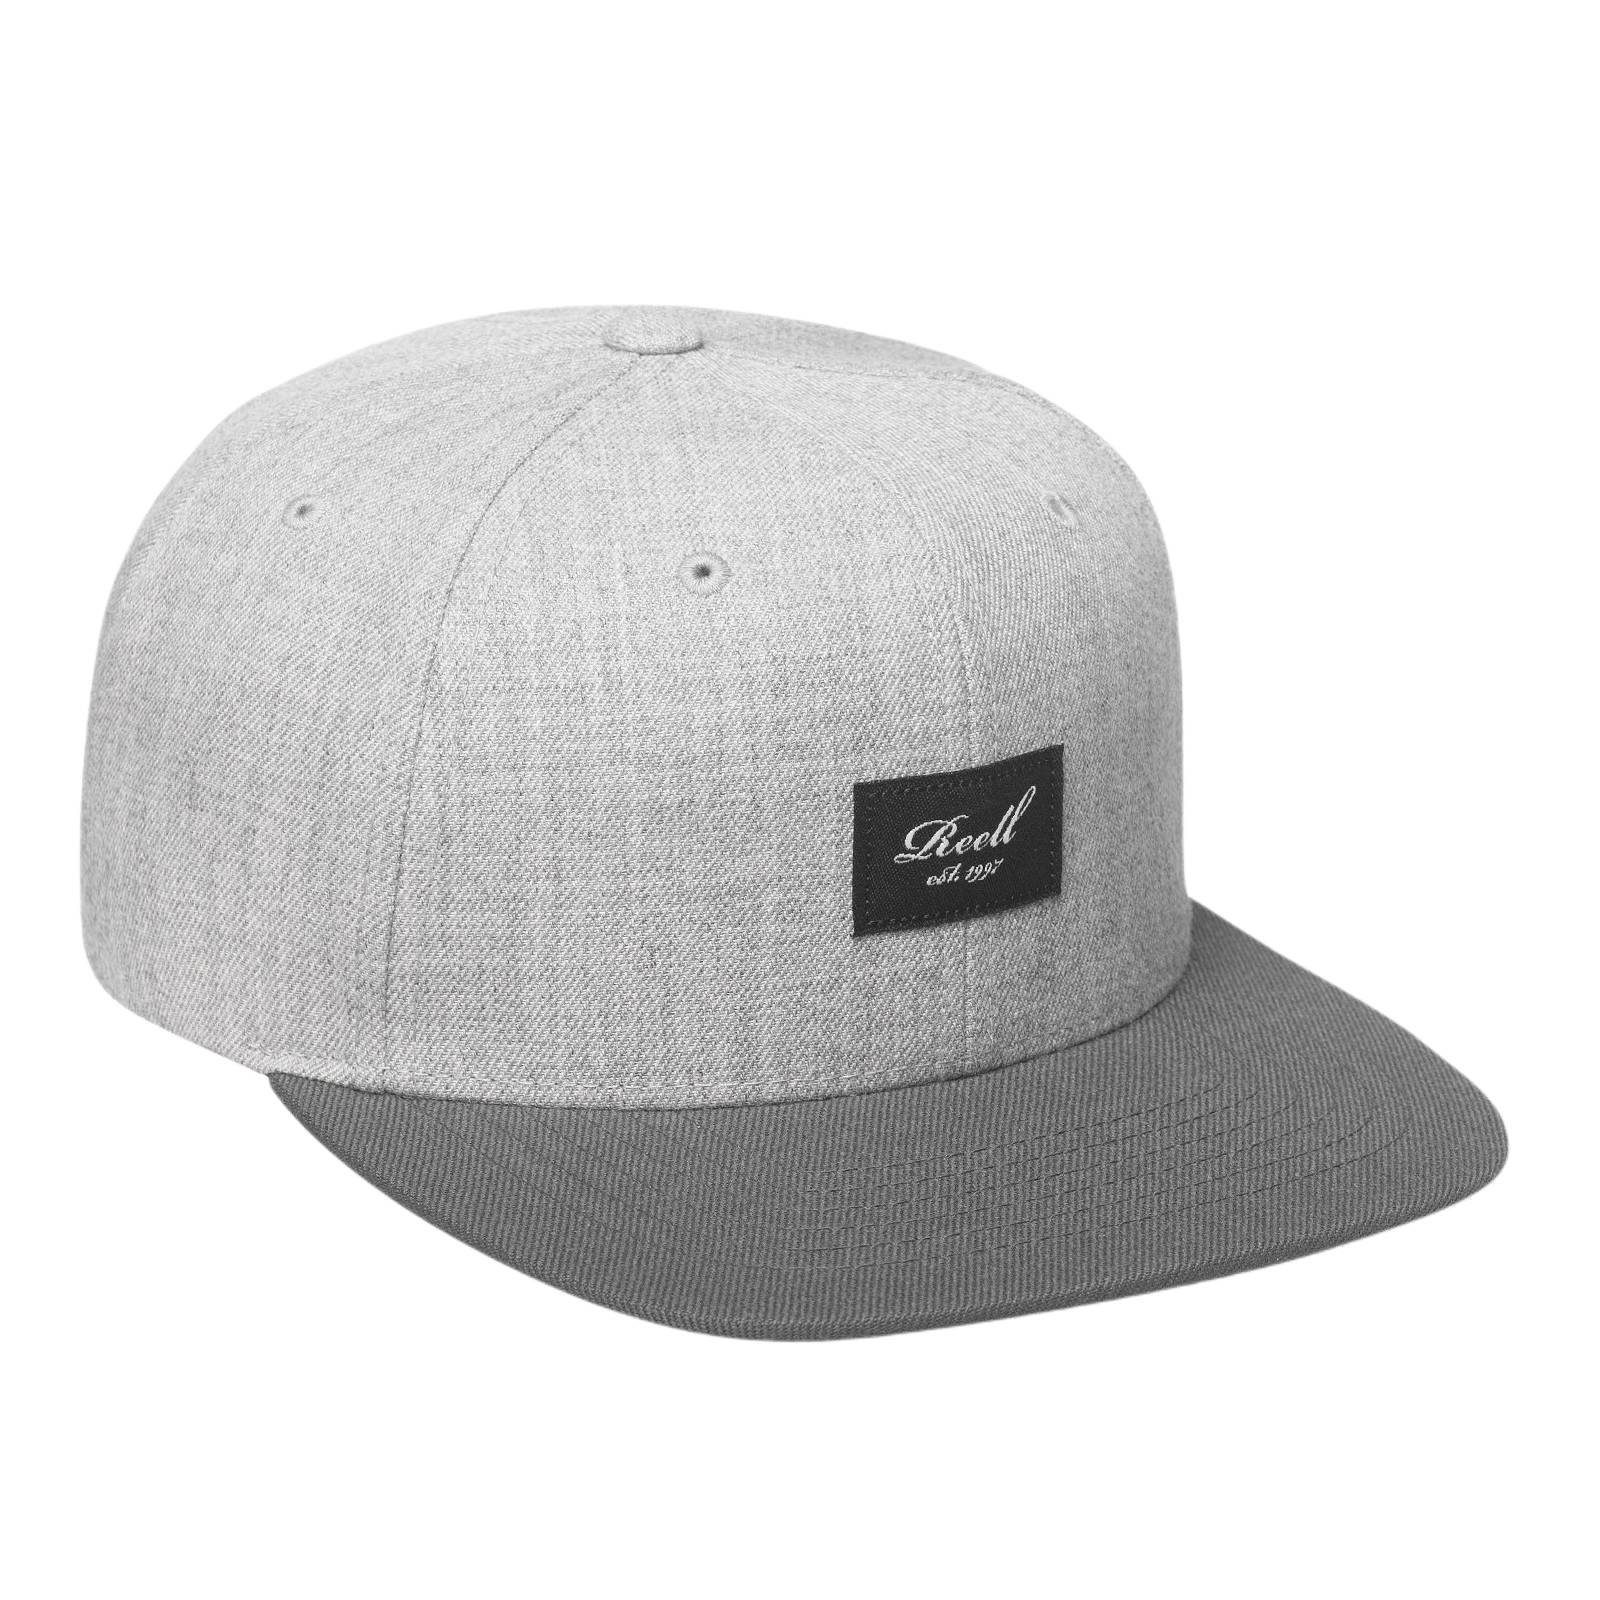 Baseball 6-Panel Reell (1-St) REELL Cap hlgry/gybl Pitchout Cap